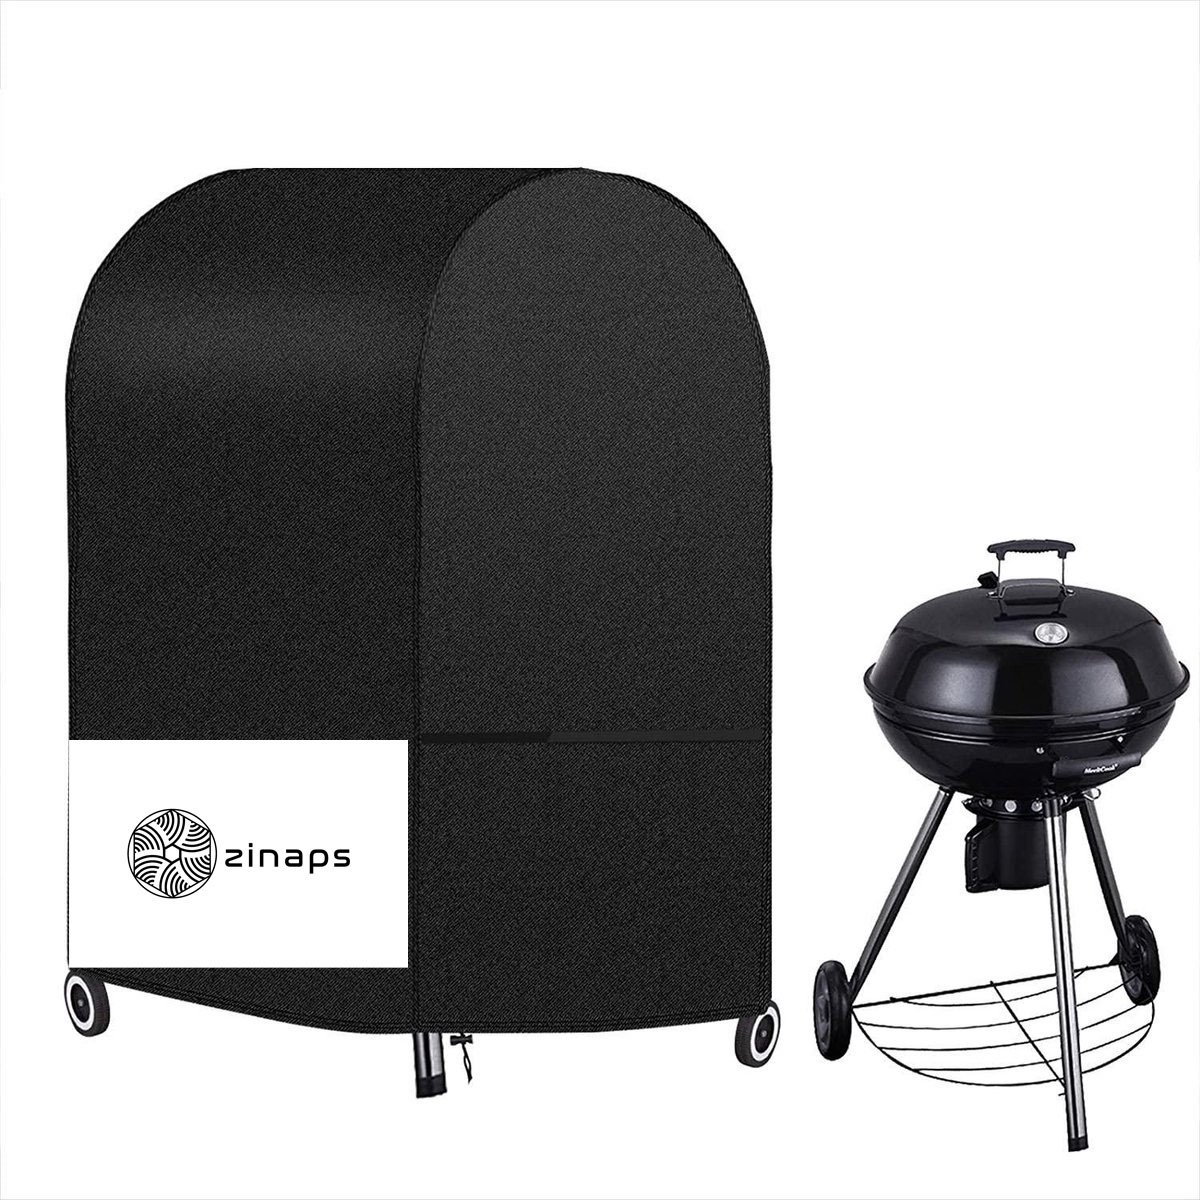 BBQ Hoes - Zinaps Barbecue Cover, Gas Grill Cover, Waterdicht, Winddicht, UV-bestand BBQ Cover, 420D Oxford-stof, Gasgrill Beschermende hoes. - (WK 02124)